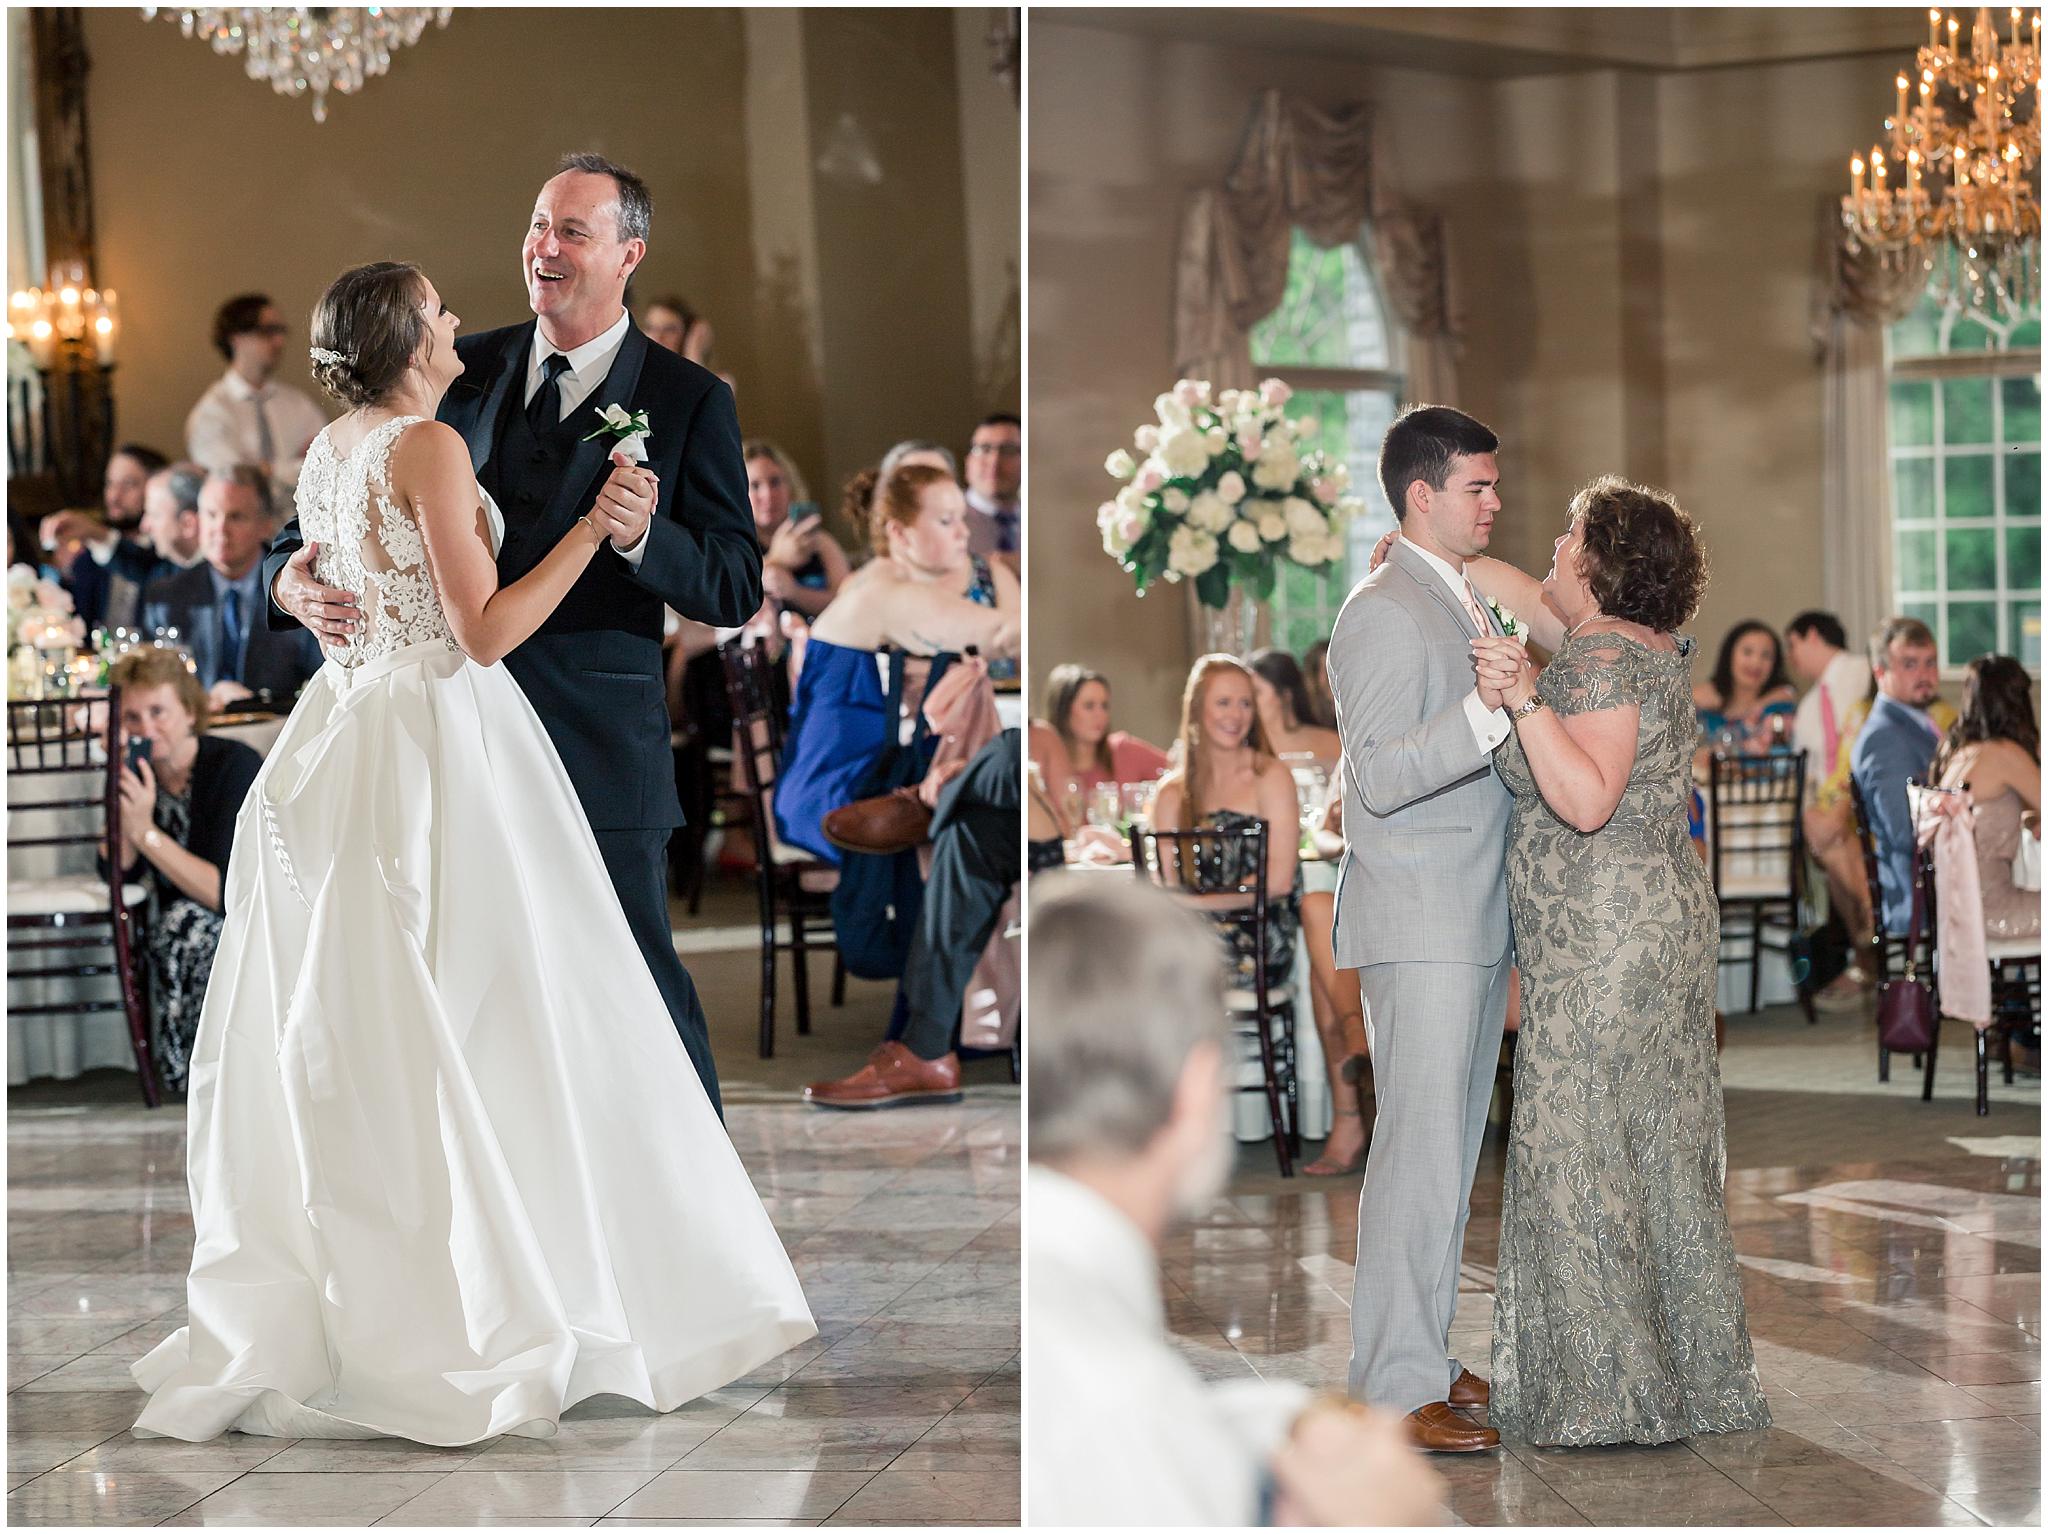 The Tate House Wedding Reception Pictures